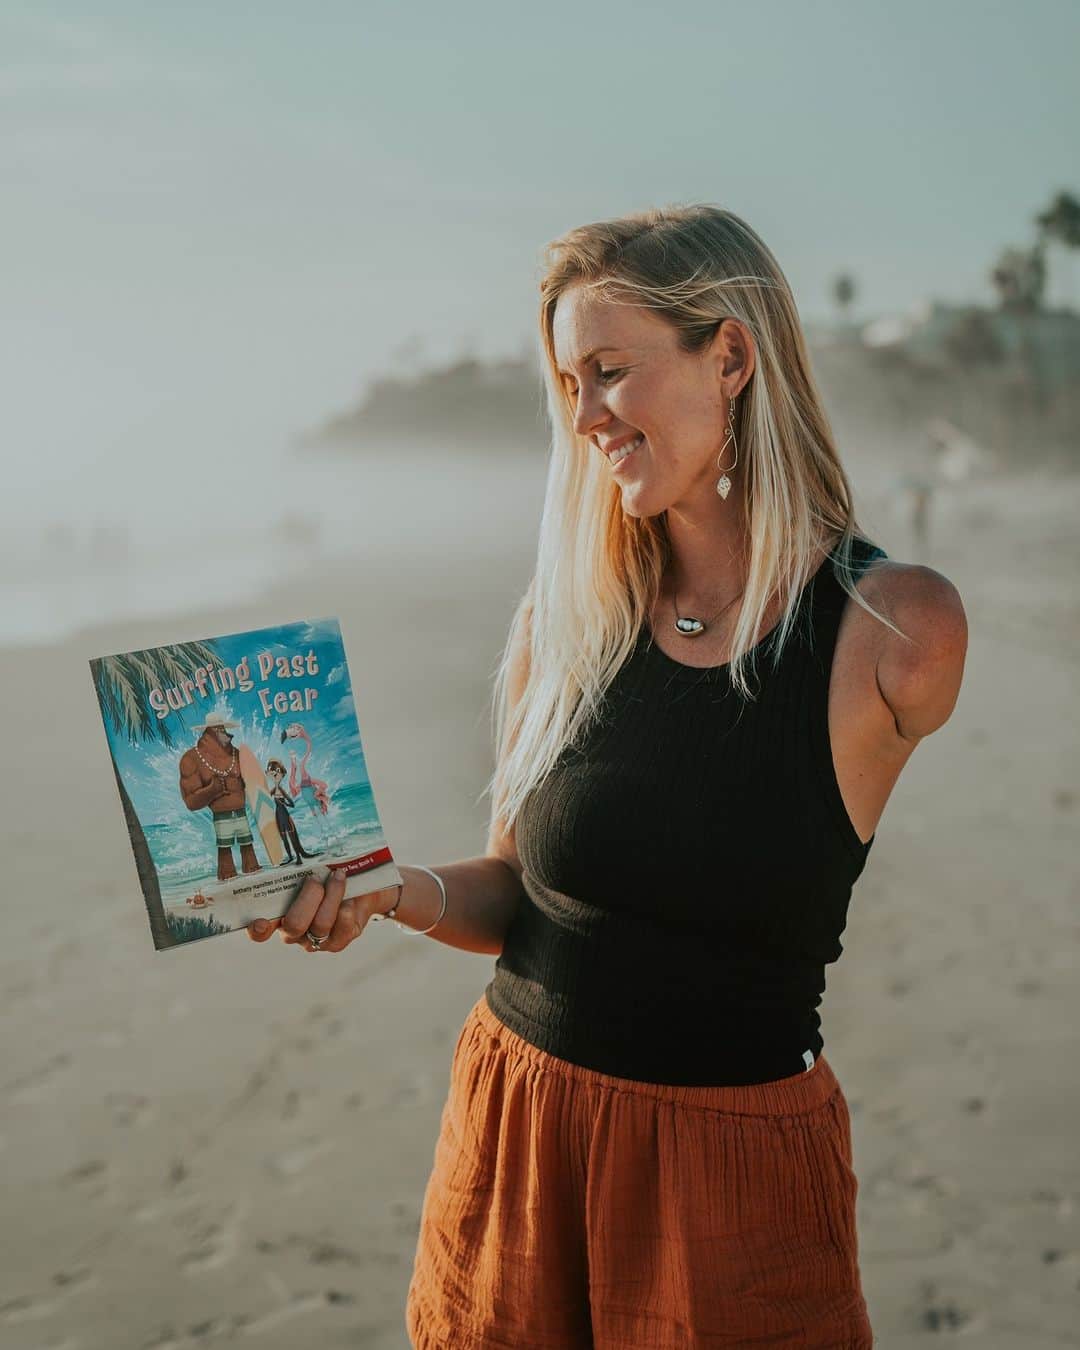 Bethany Hamiltonのインスタグラム：「If you’re looking for a way to start meaningful conversations with your children check out my “Surfing Past Fear” book!!! It’s a rad way to remind our children they can overcome their fears and that we haven’t been given a spirit of fear! (2 Timothy 1:7).   Happy Easter week yawl!   The book is part of @bravebooks.us’ Freedom Island saga, which my family loves! Find Surfing Past Fear at the link in my bio.  #bravebooks #surfingpastfear #braveisbetter」